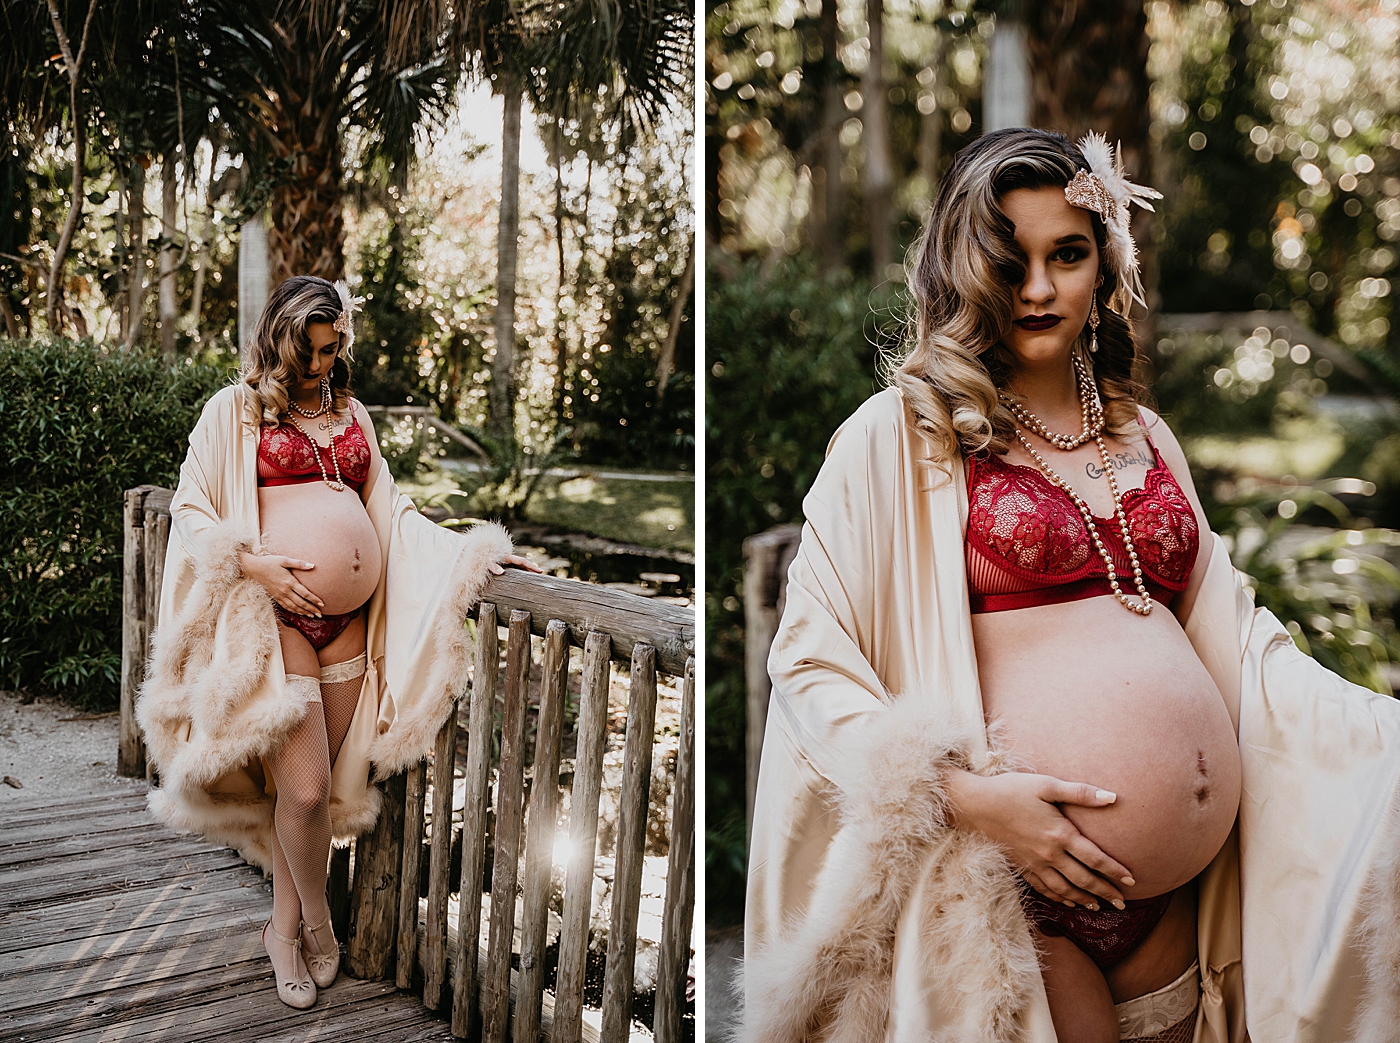 Soon to be mother on wood bridge holding bump South Florida Maternity Photography captured by South Florida Family Photographer Krystal Capone Photography 